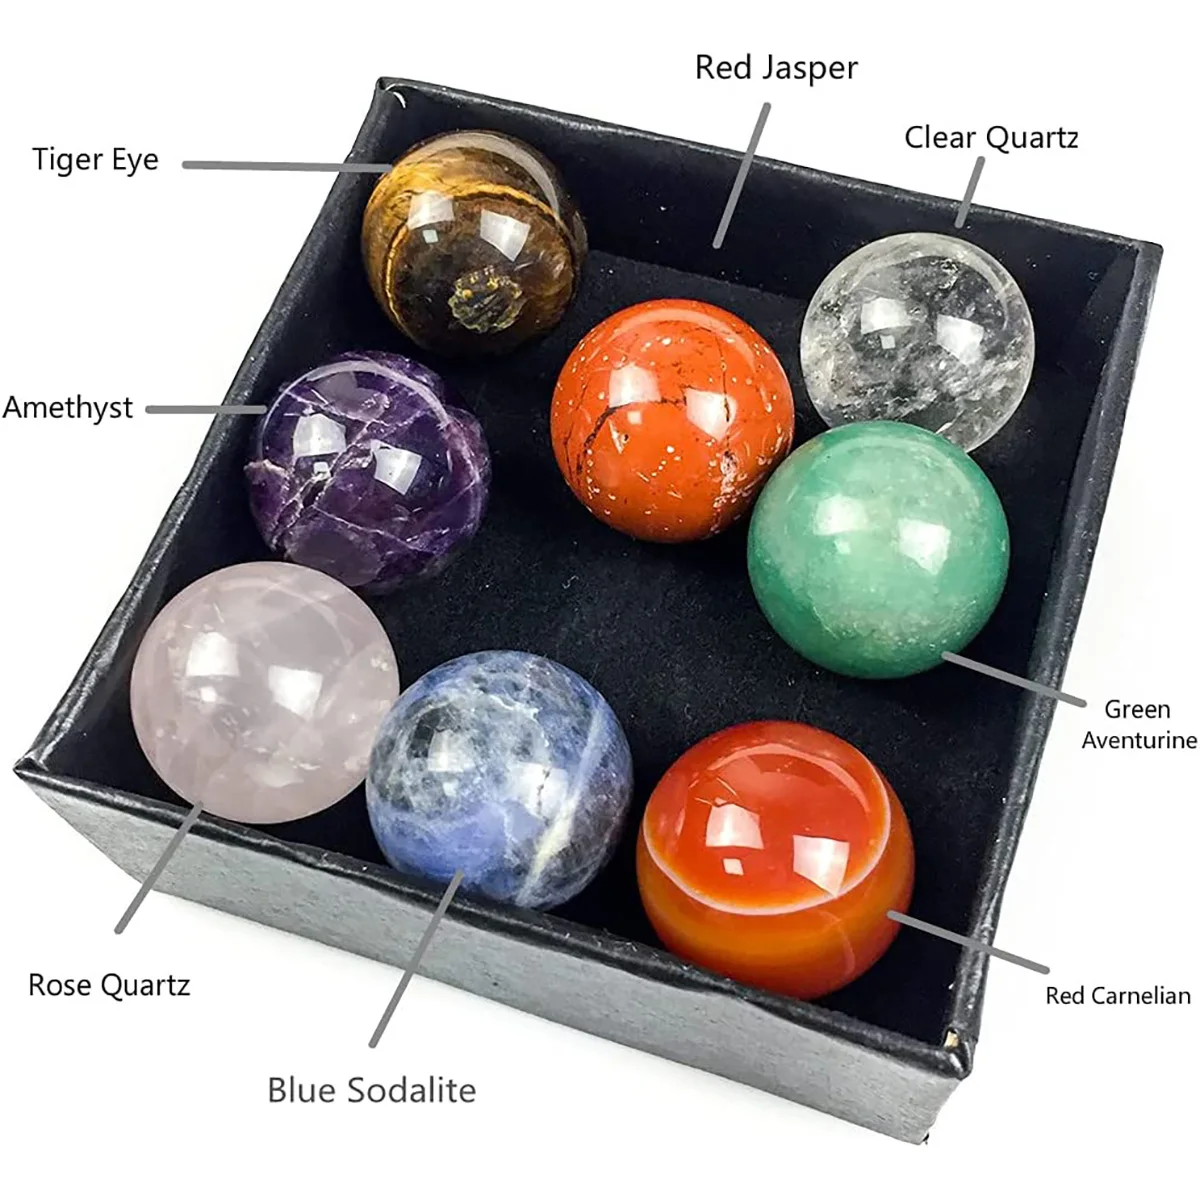 

8 Crystal Sphere Ball Gift for Chakra Balancing Therapy Healing Stones Crystals Spheres Balls Diameter 20mm